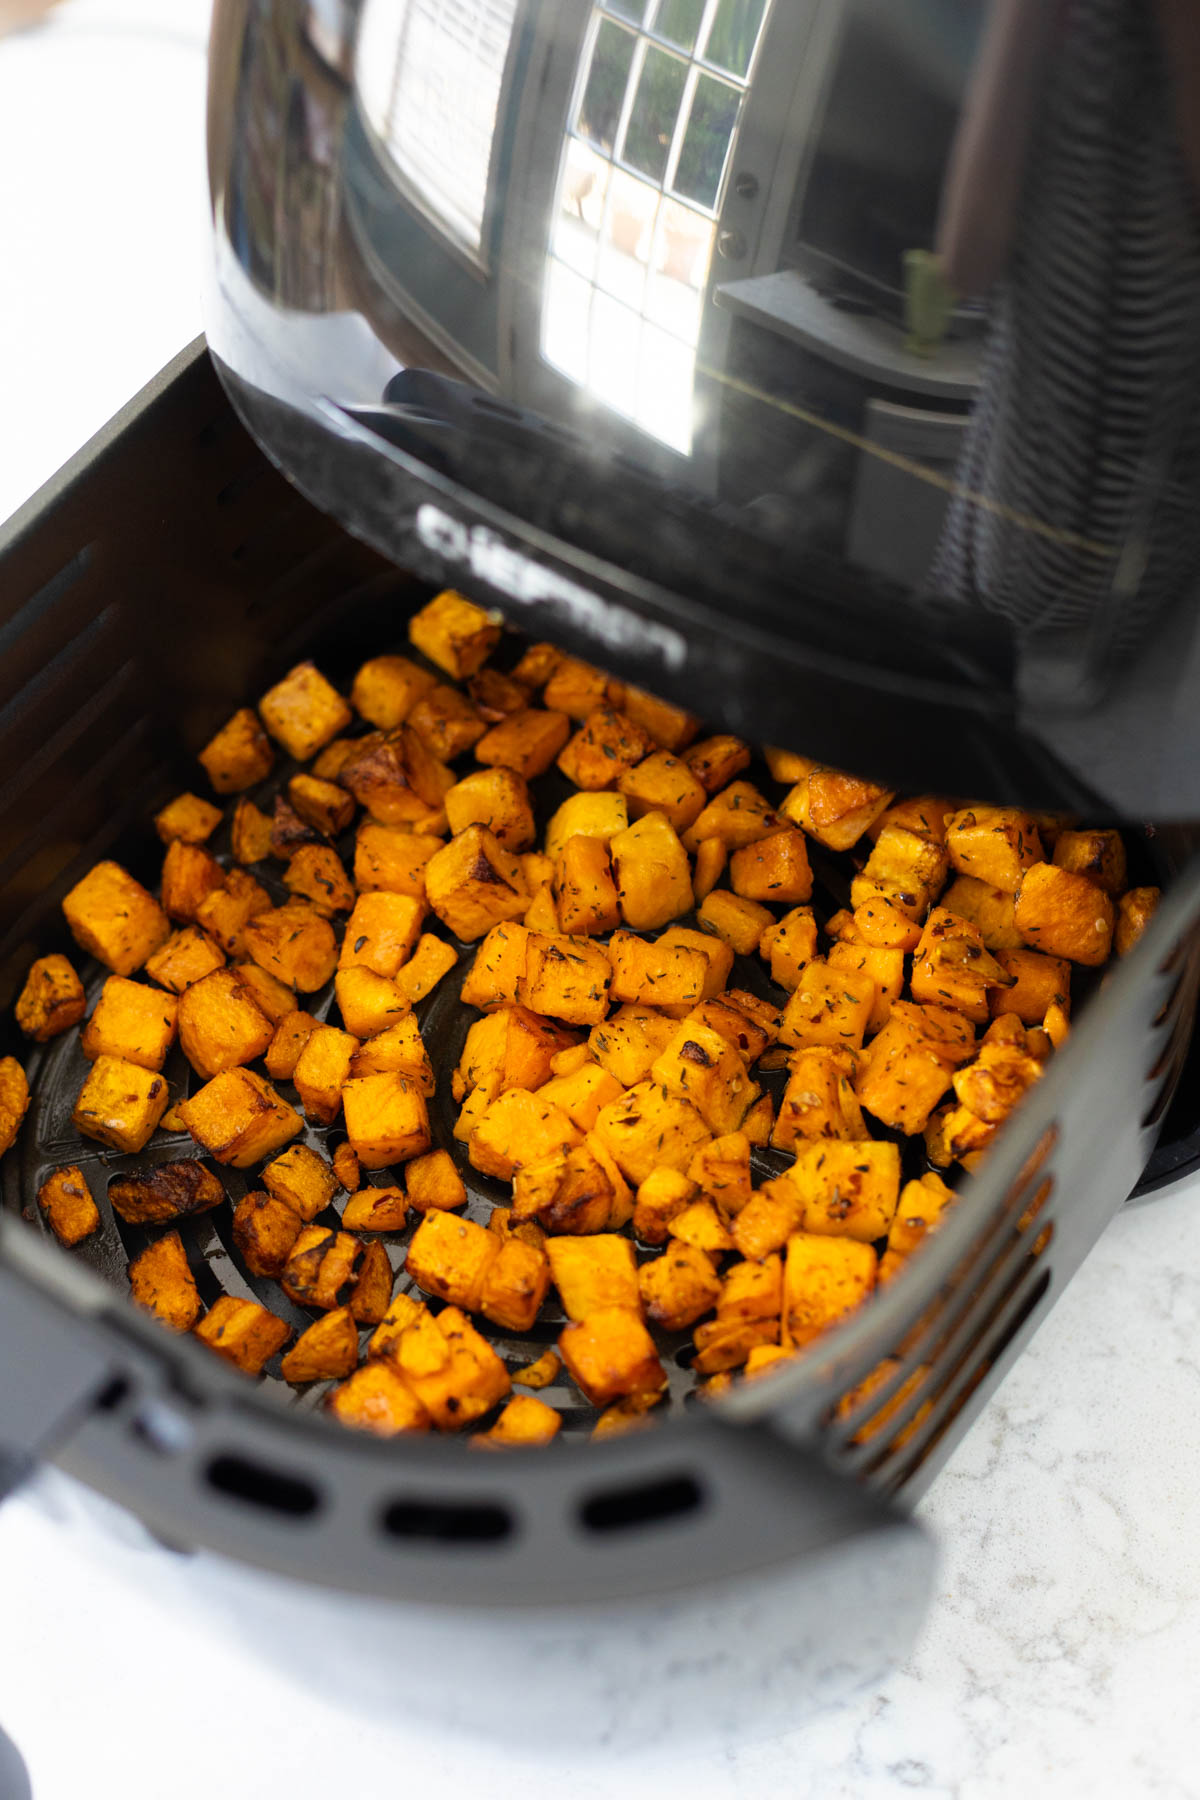 The air fryer basket is open and shows the butternut squash inside.